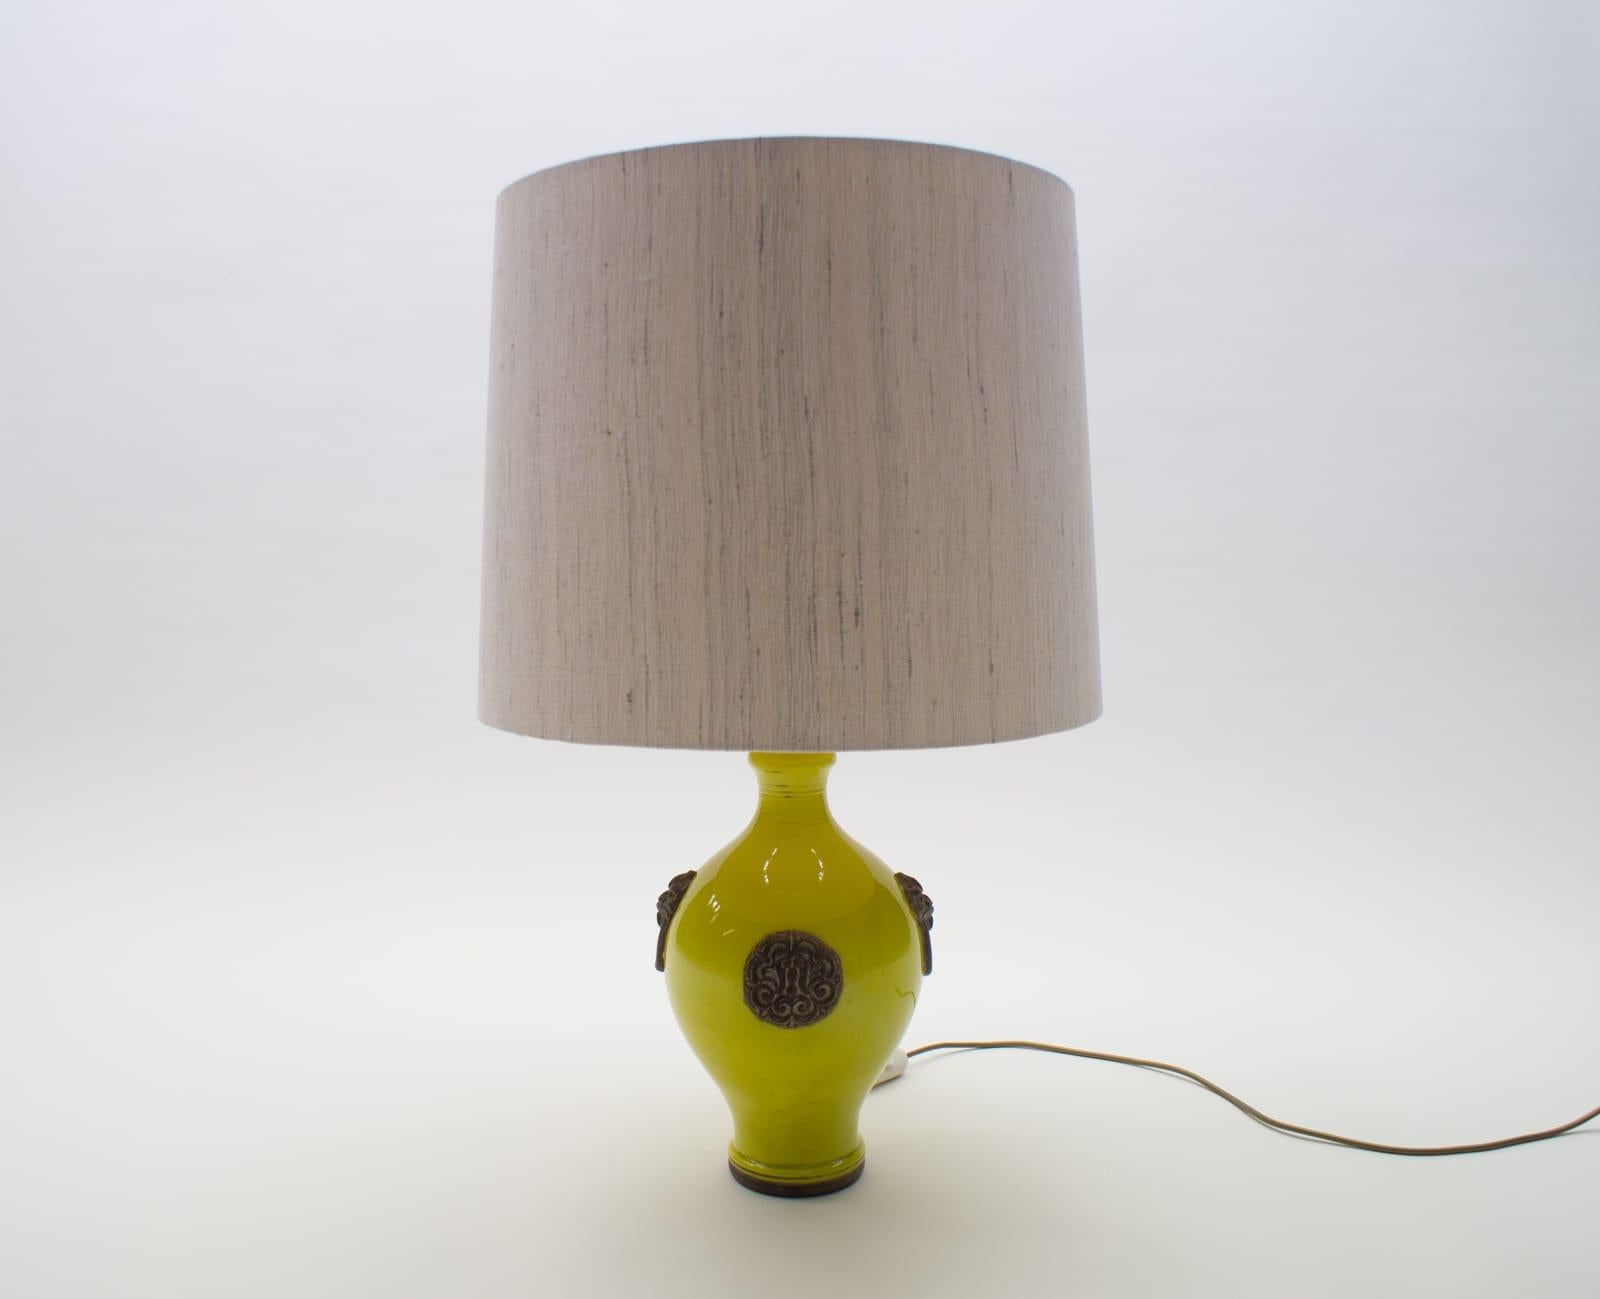 Mid-Century Modern Oatmeal and Yellow Gilt Glazed Ceramic Table Lamp by Ugo Zaccagnini, Italy 1960s For Sale